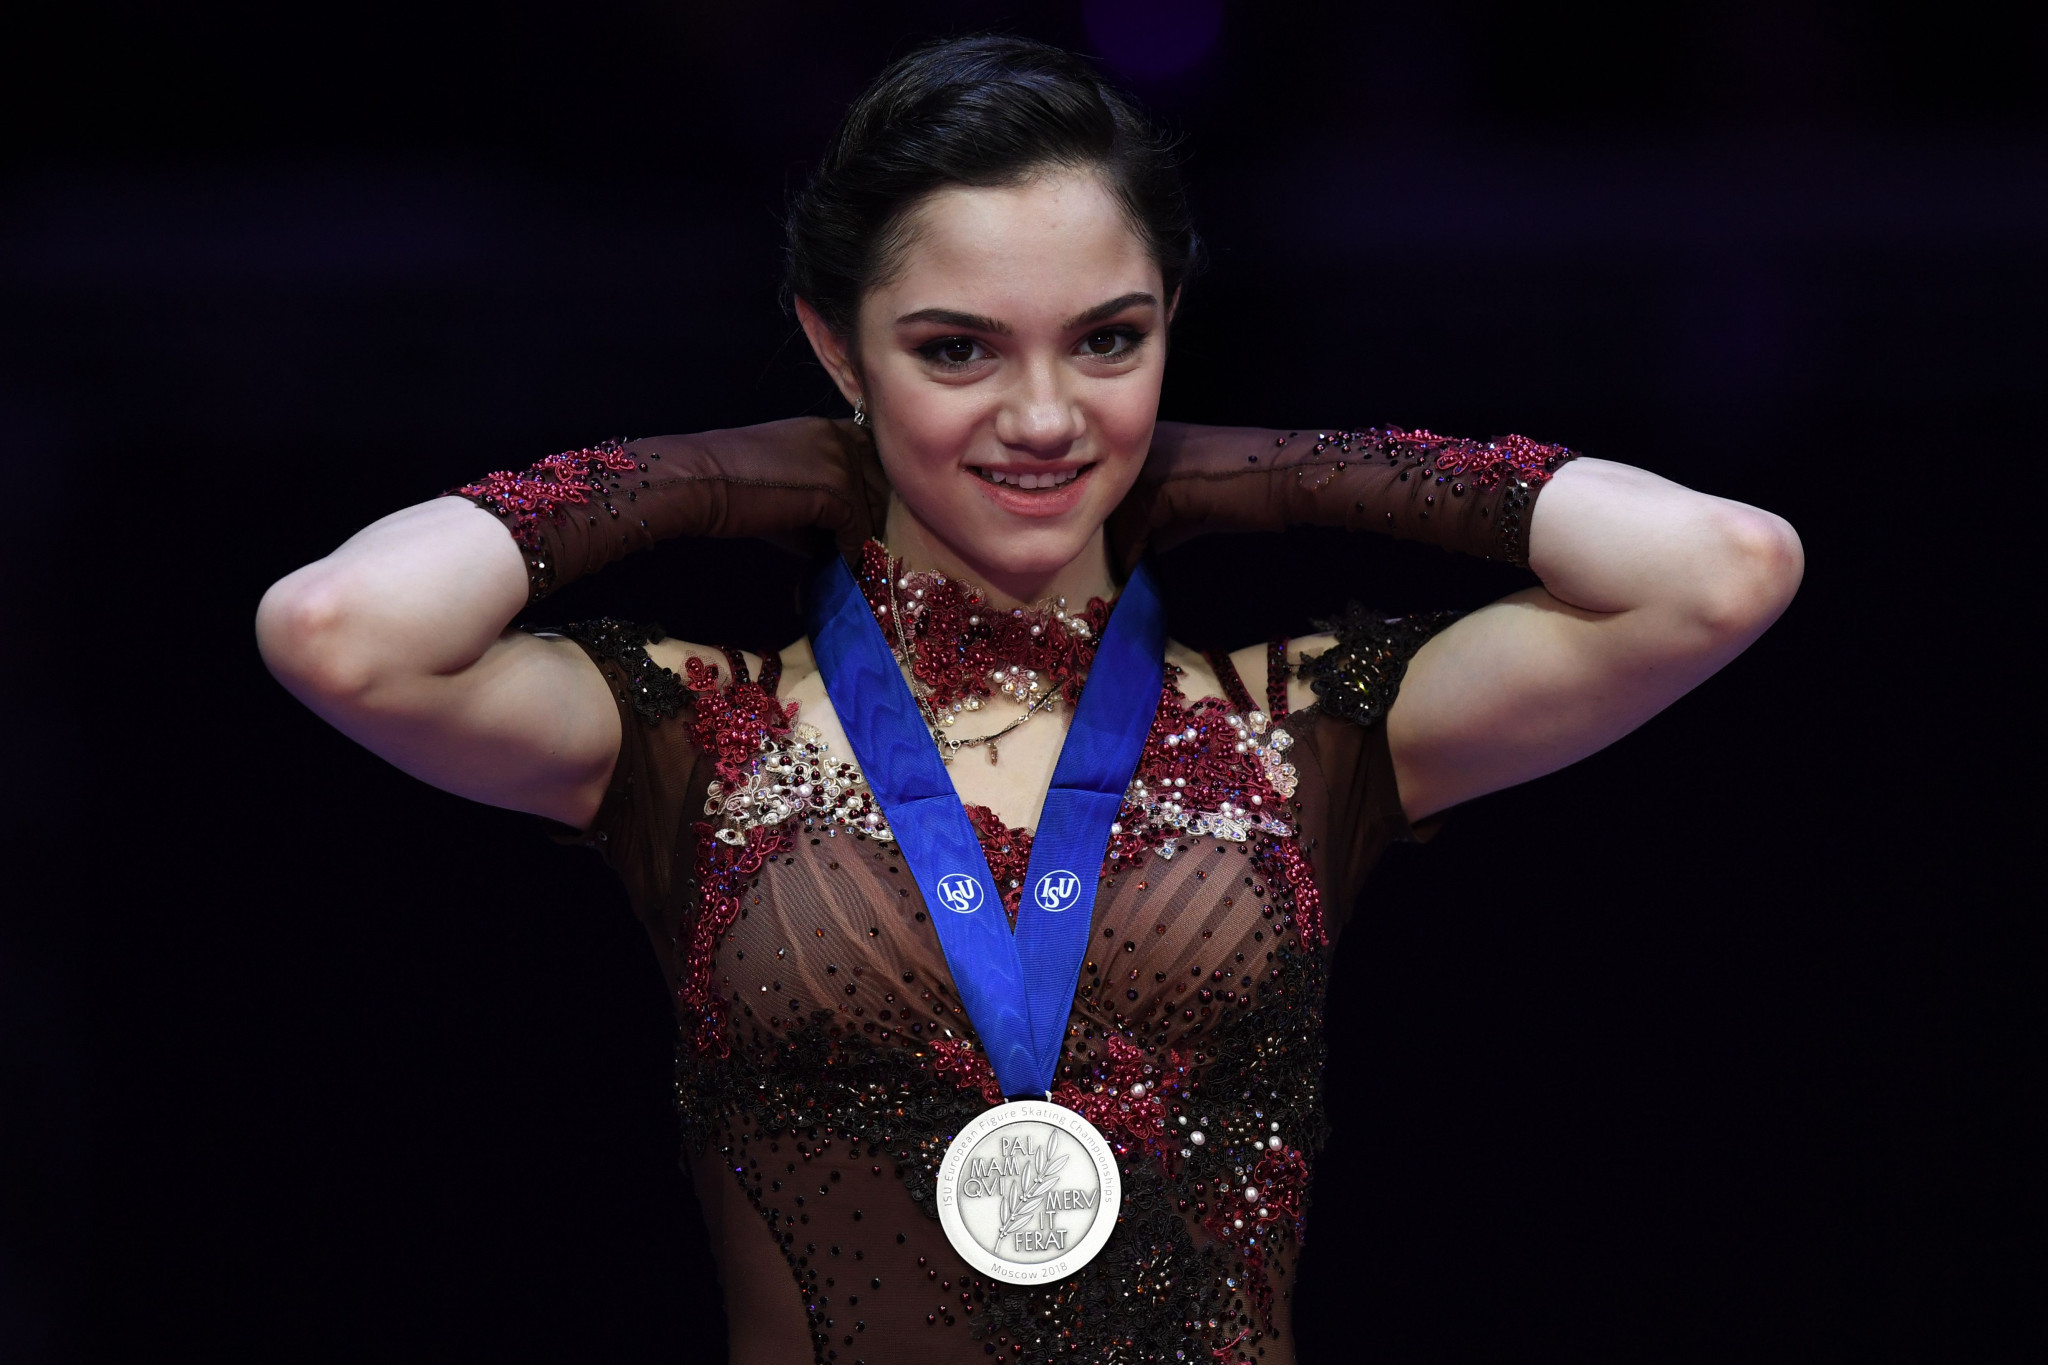 Evgenia Medvedeva had been the heavy favourite before the event got underway ©Getty Images